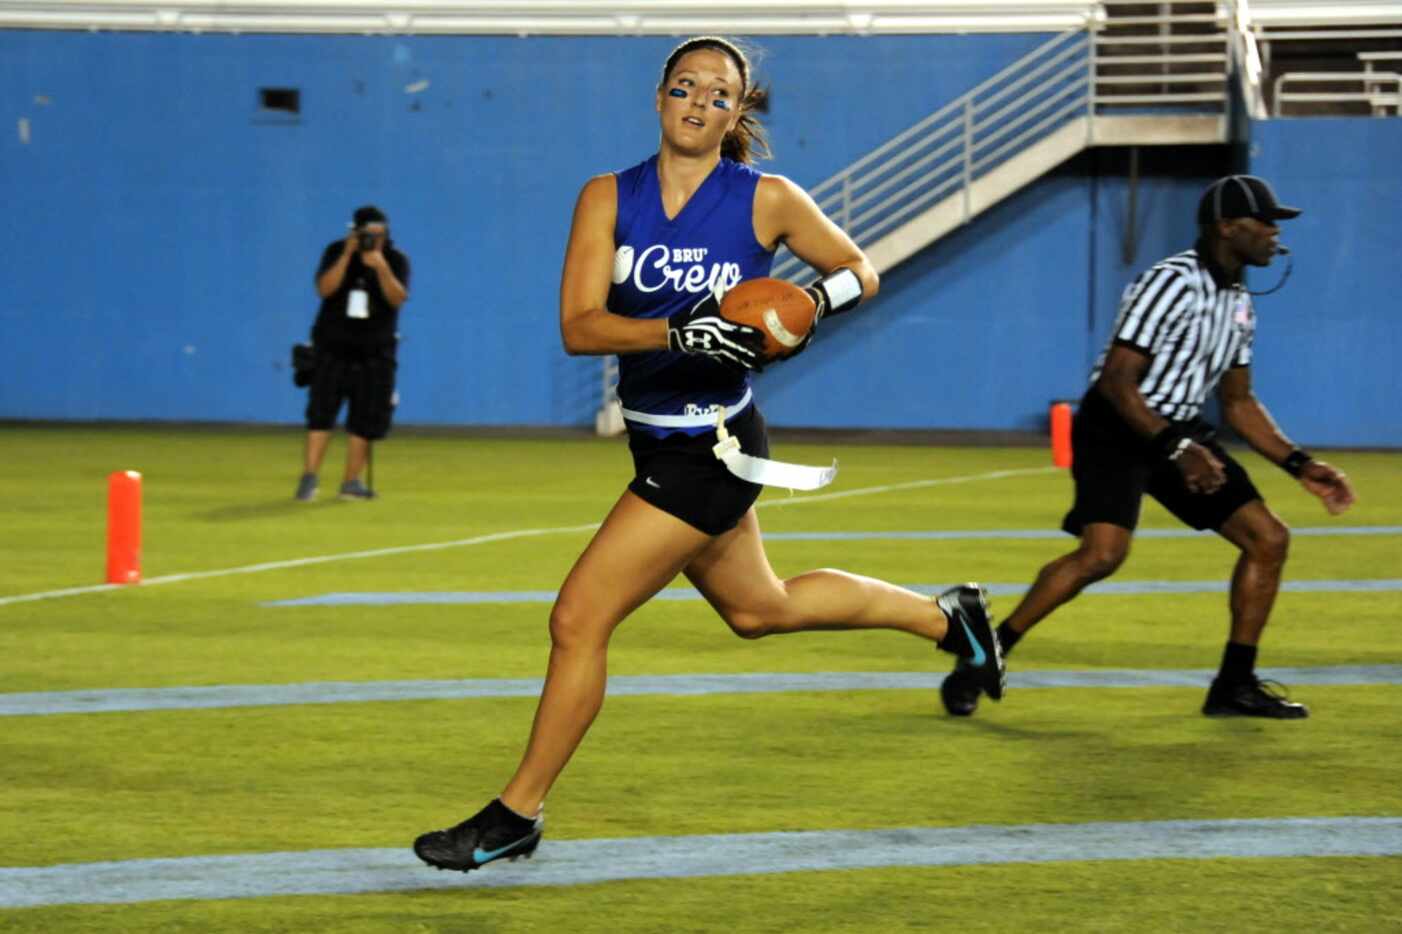 Jade Randle runs with the ball at Blondes vs. Brunettes powder-puff football game at The...